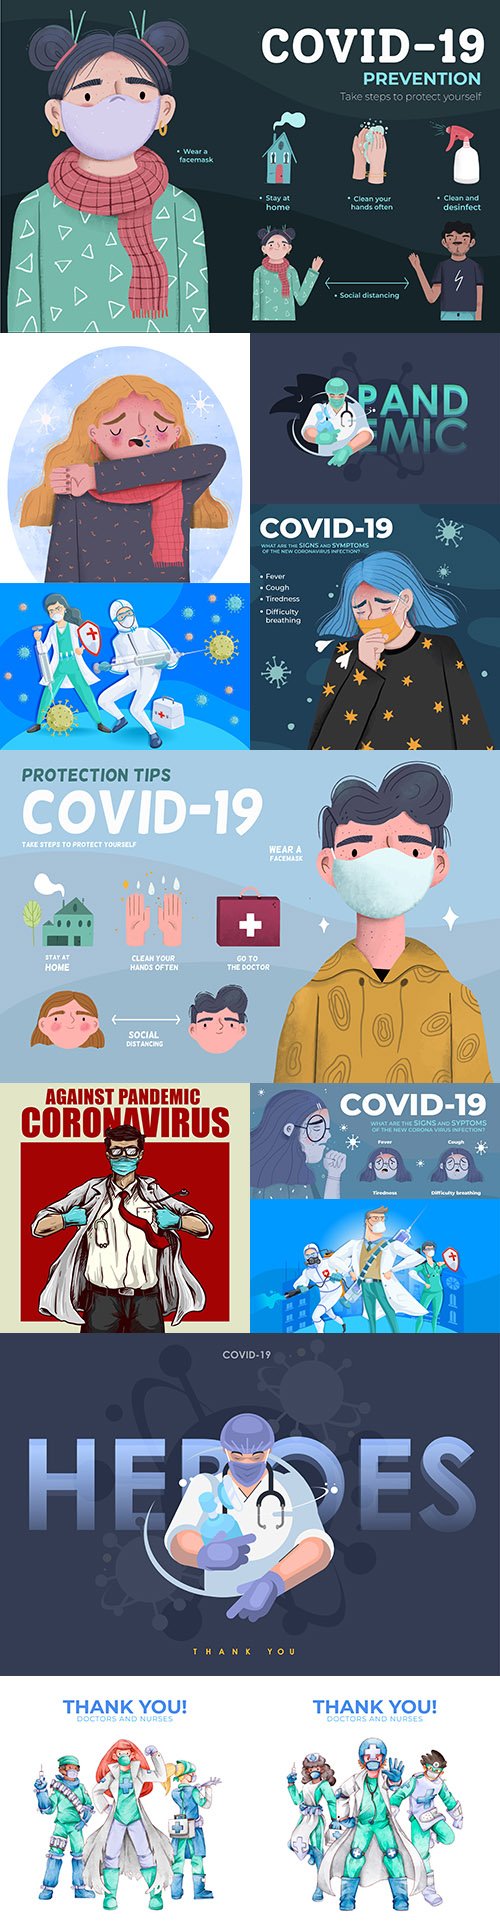 Prevention and protection against coronavirus collection of illustrations